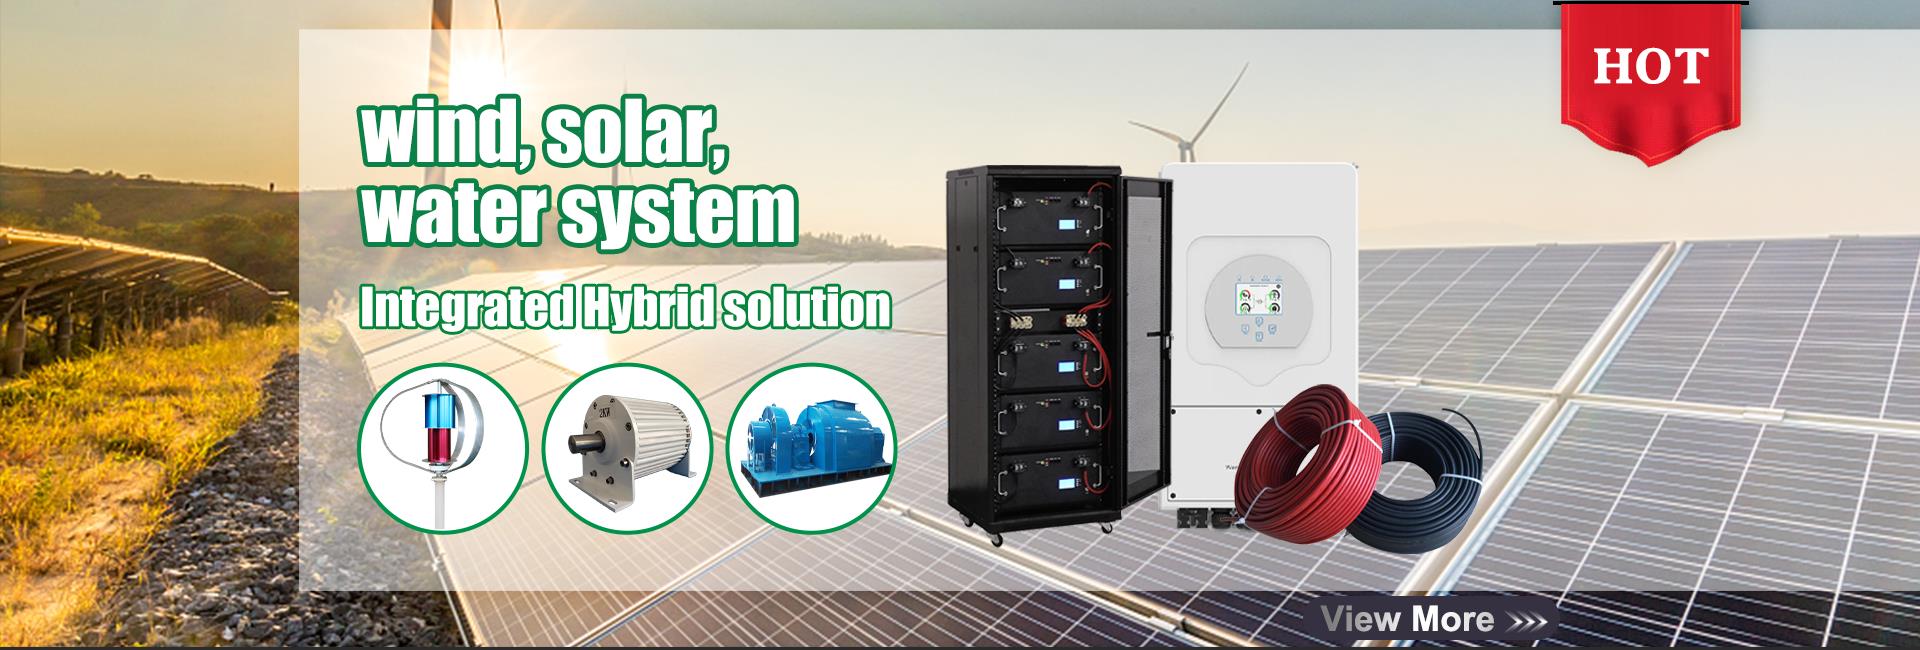 wind, solar, water system Integrated Hybrid solution 